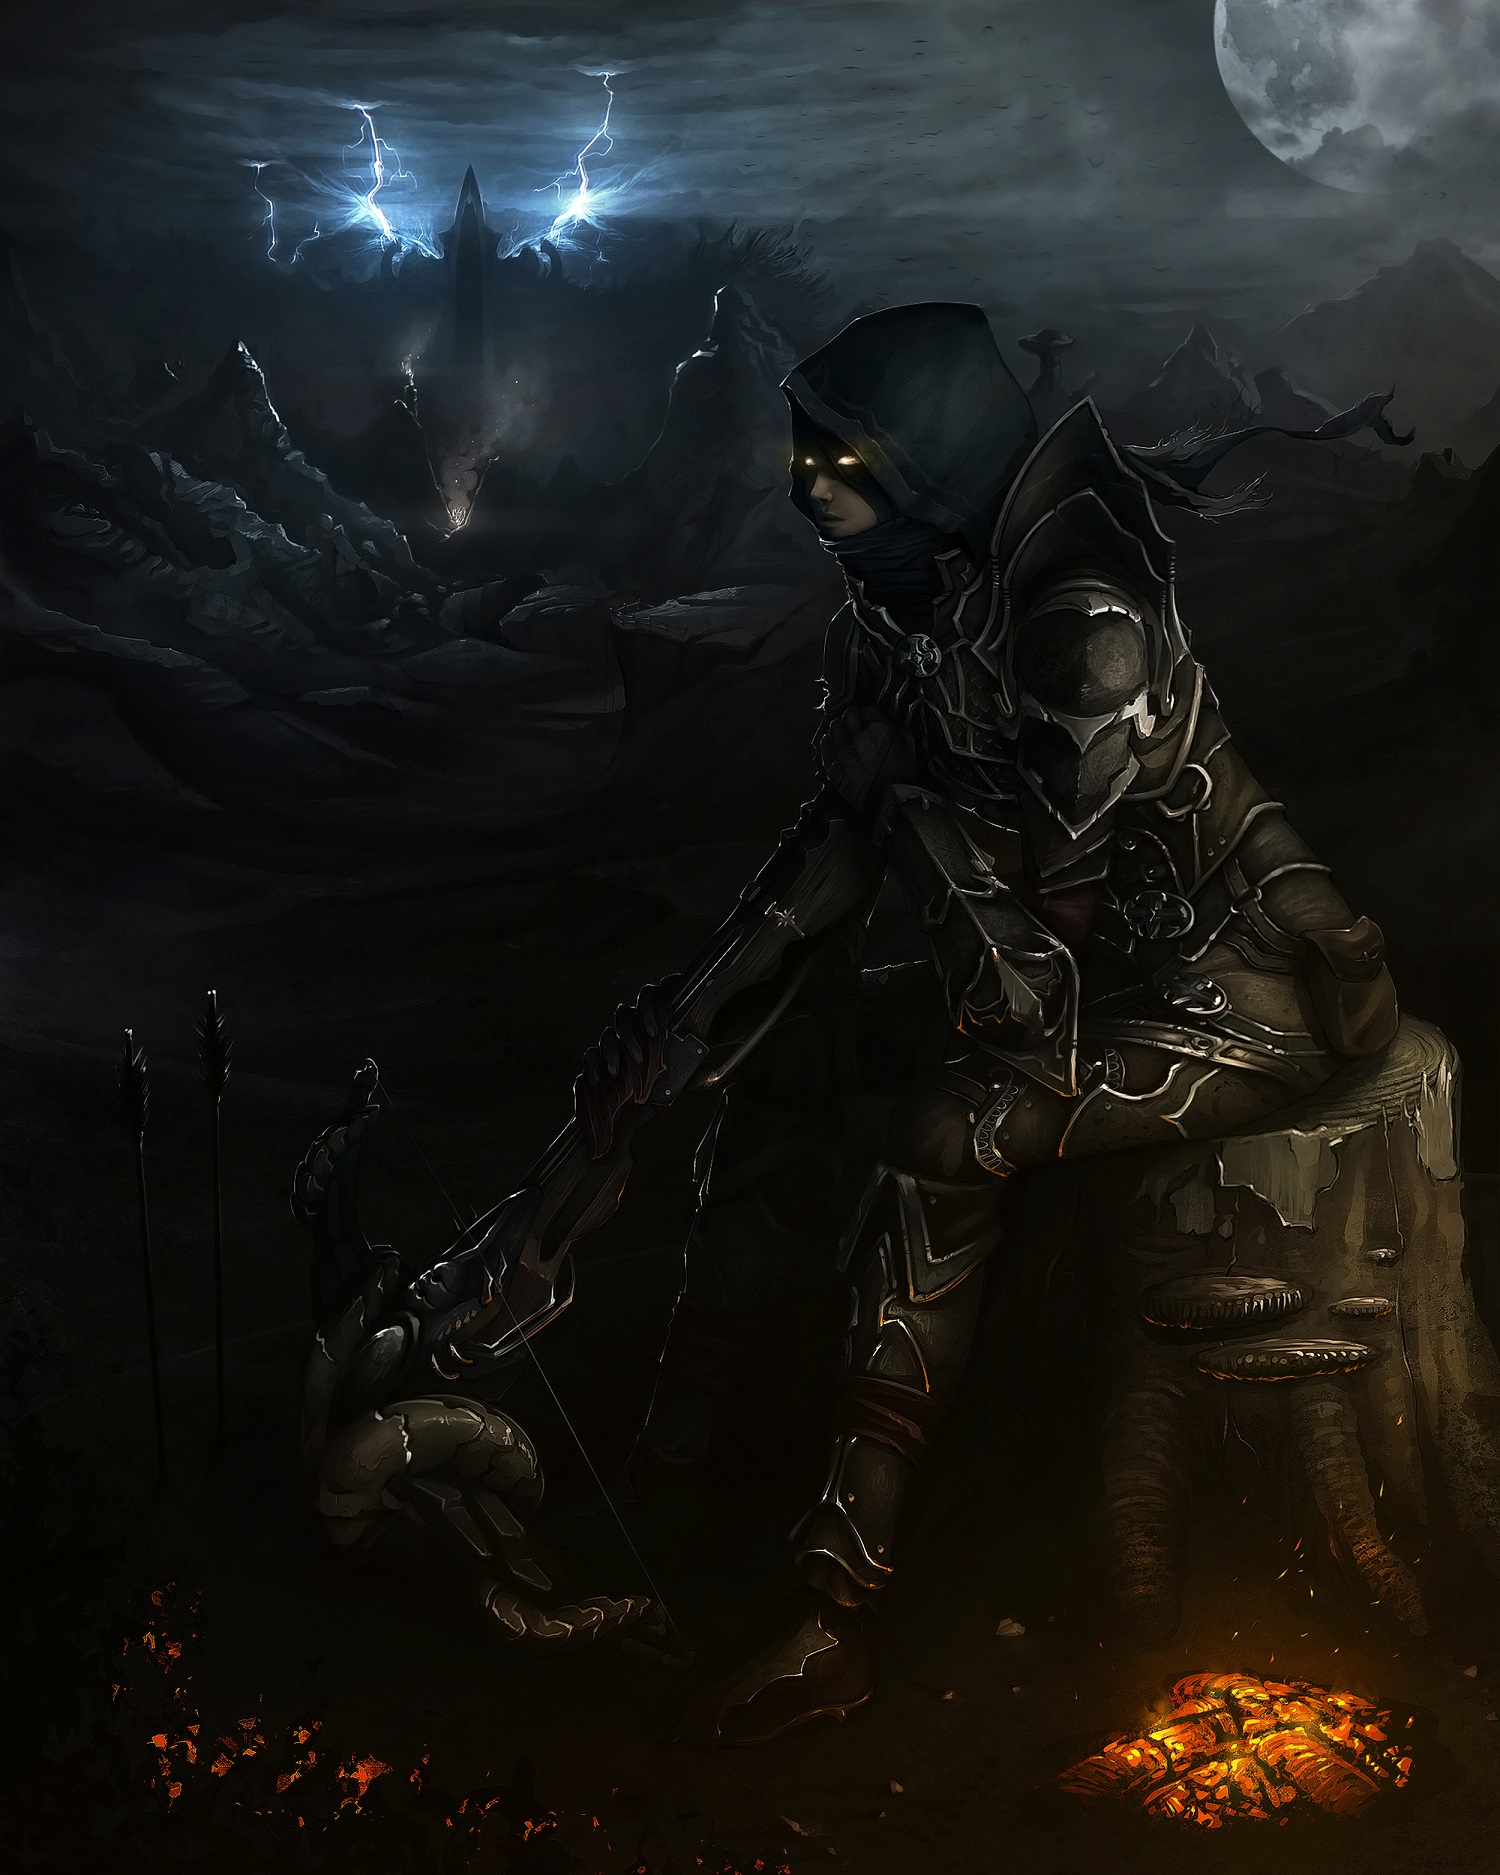 diablo_iii___awaiting_the_storm_by_makingpicsslowly-d78qesf1.jpg